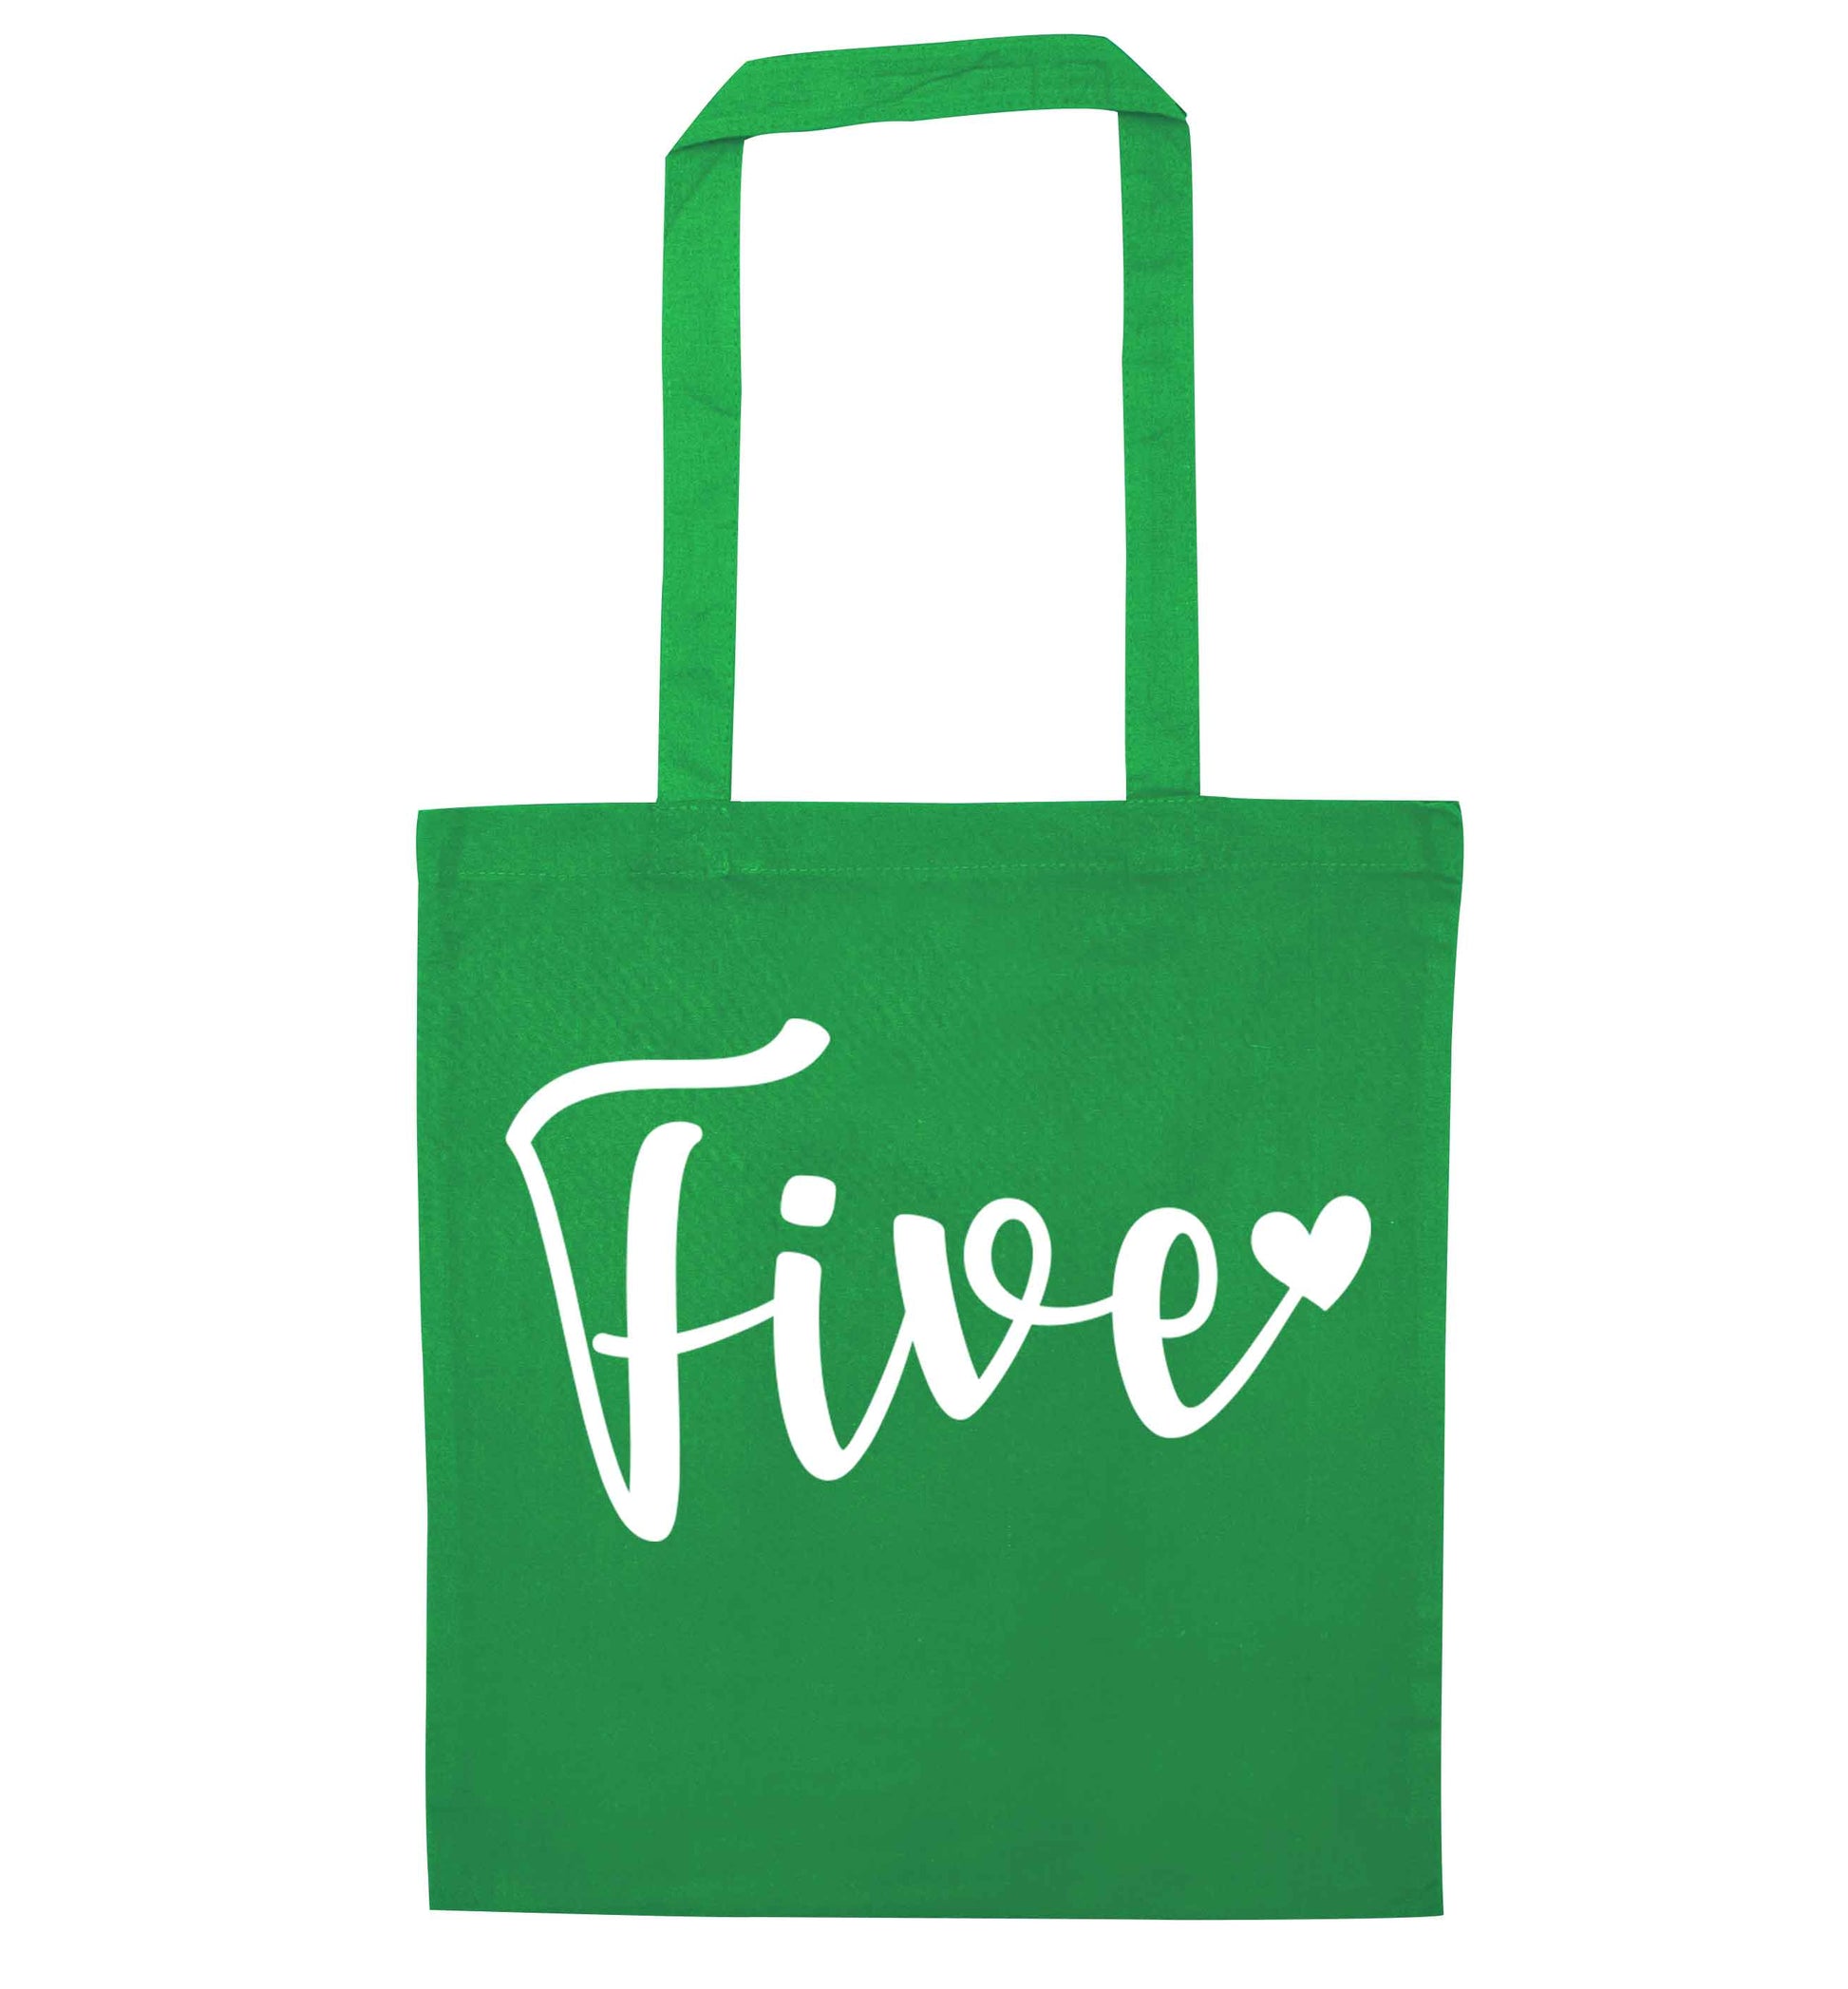 Five and heart green tote bag